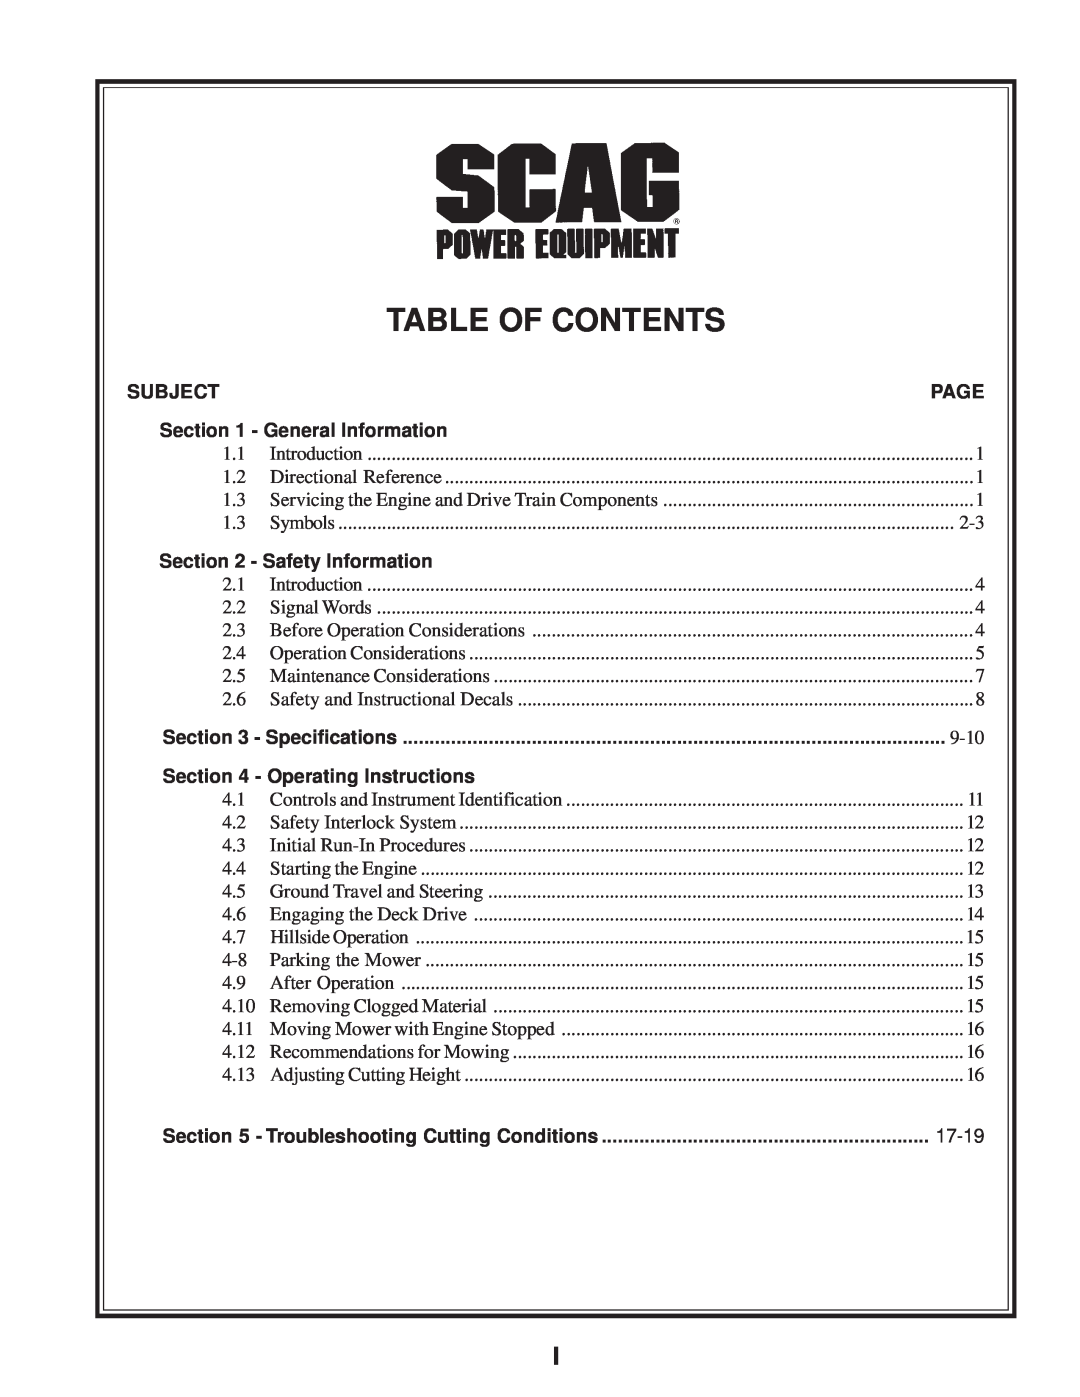 Scag Power Equipment SWZV manual Table Of Contents, Subject, Page, General Information, Safety Information, 17-19 